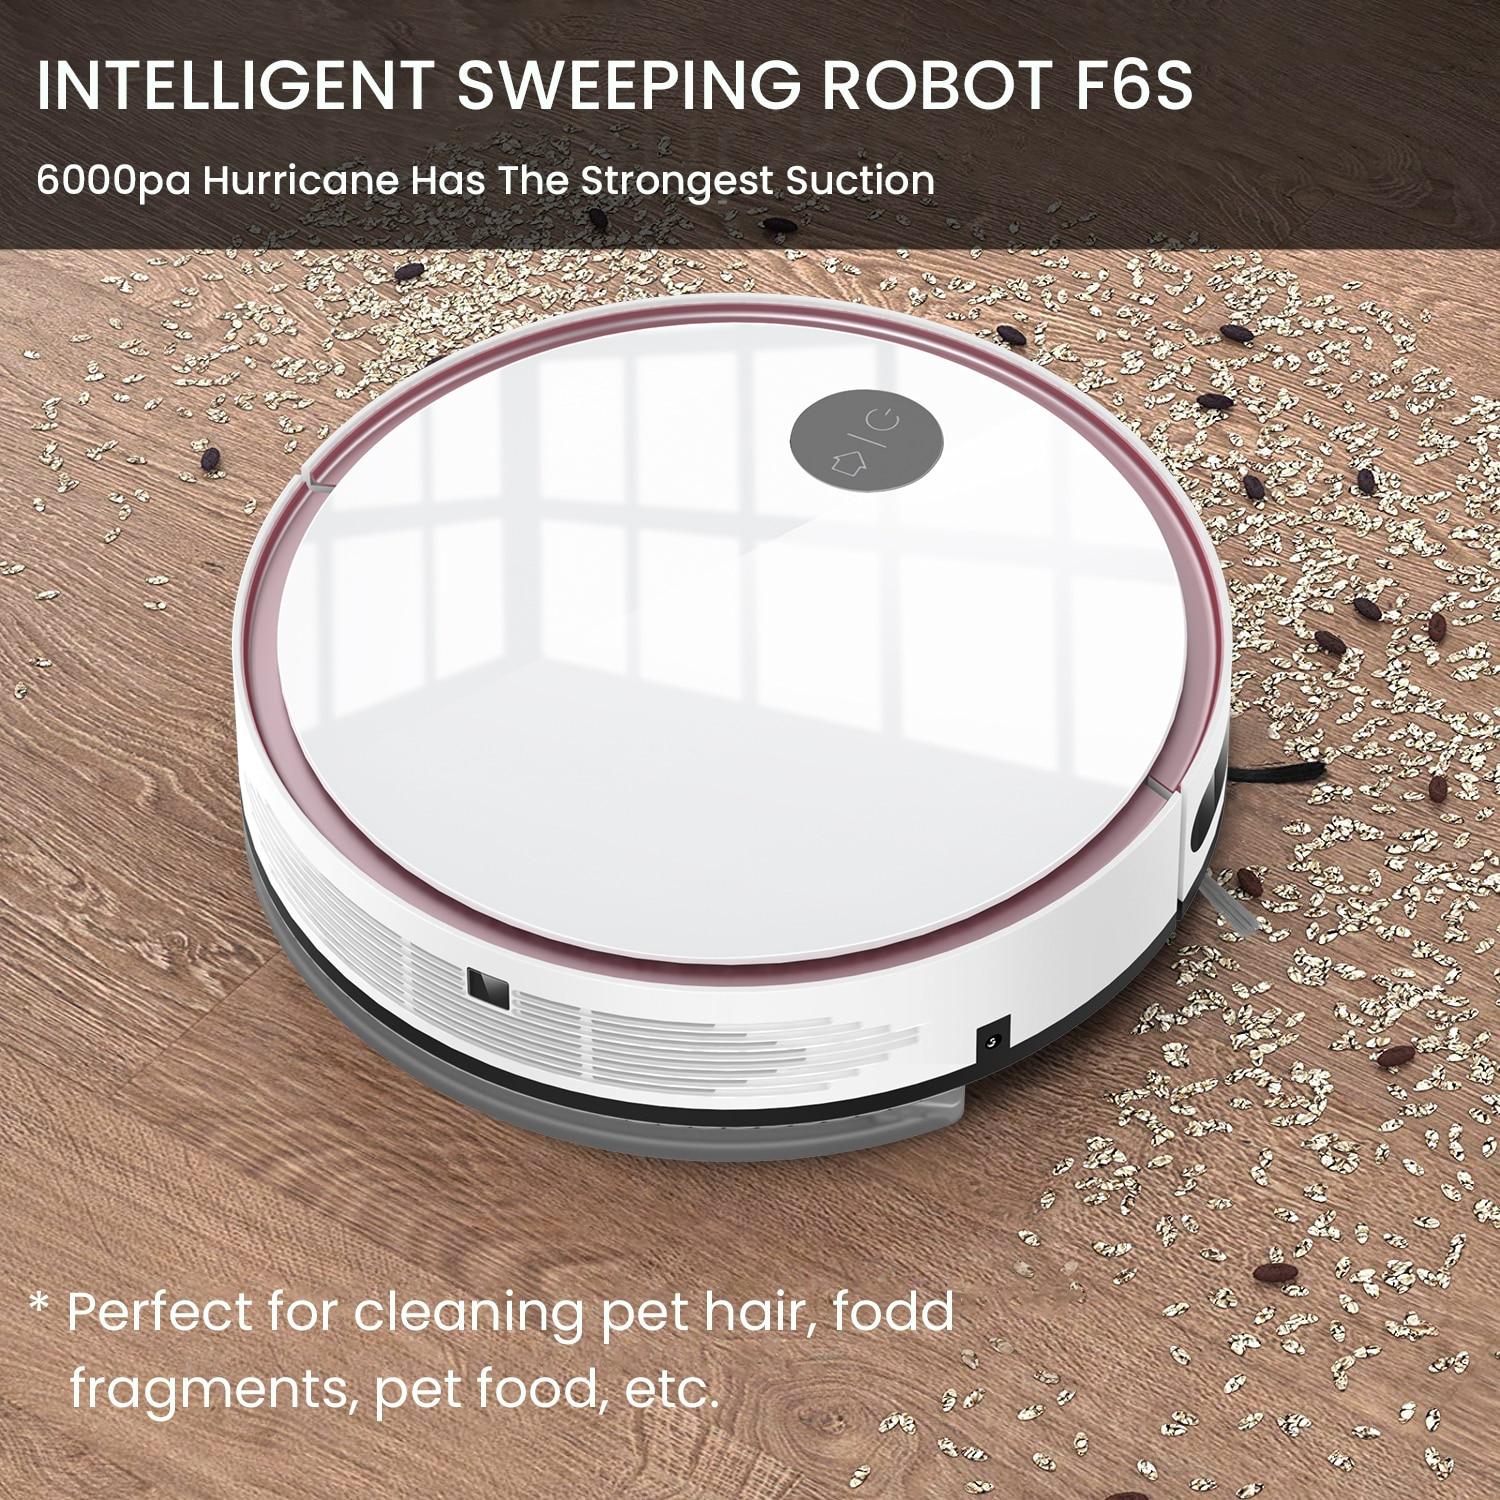 Auto Recharge 6000PA Robot Vacuum Cleaner App Remote Control Timer Vacuum Cleaner Household Cleaning Mopping Floor Sweeper